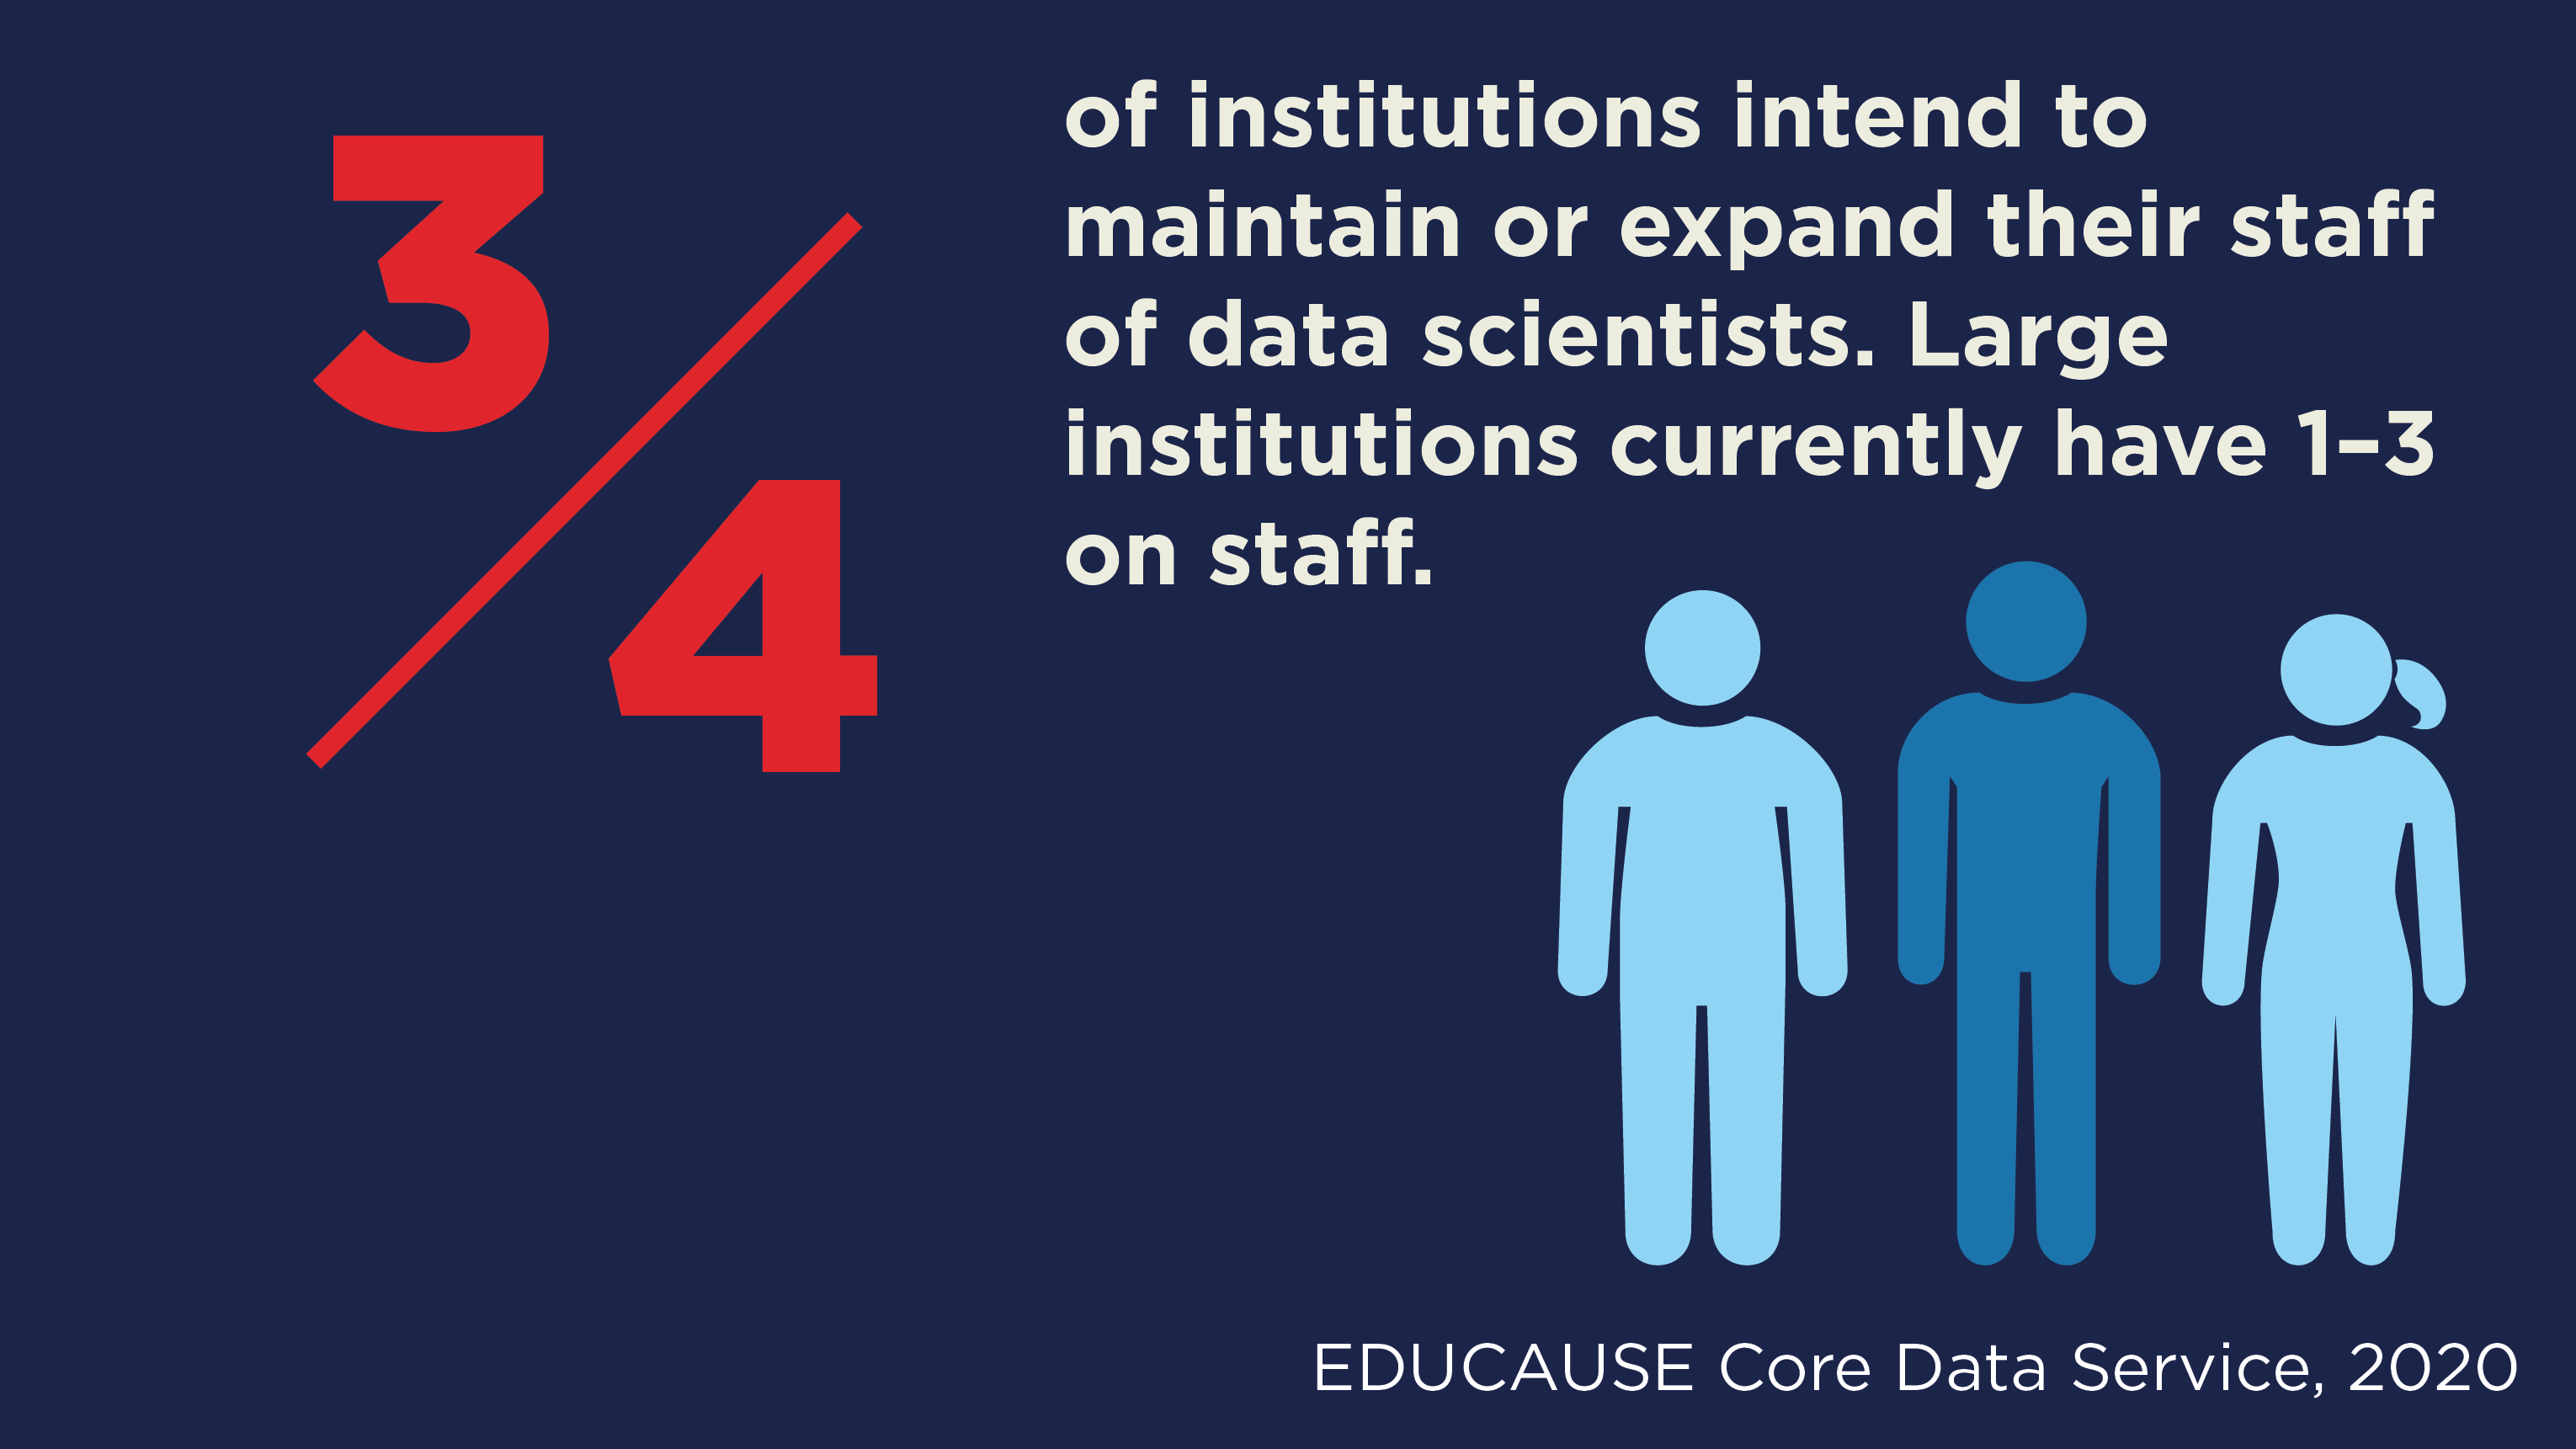 3/4 of institutions intend to maintain or expand their staff of data scientists. Large institutions currently have 1-3 on staff. EDUCAUSE Core Data Service 2020.